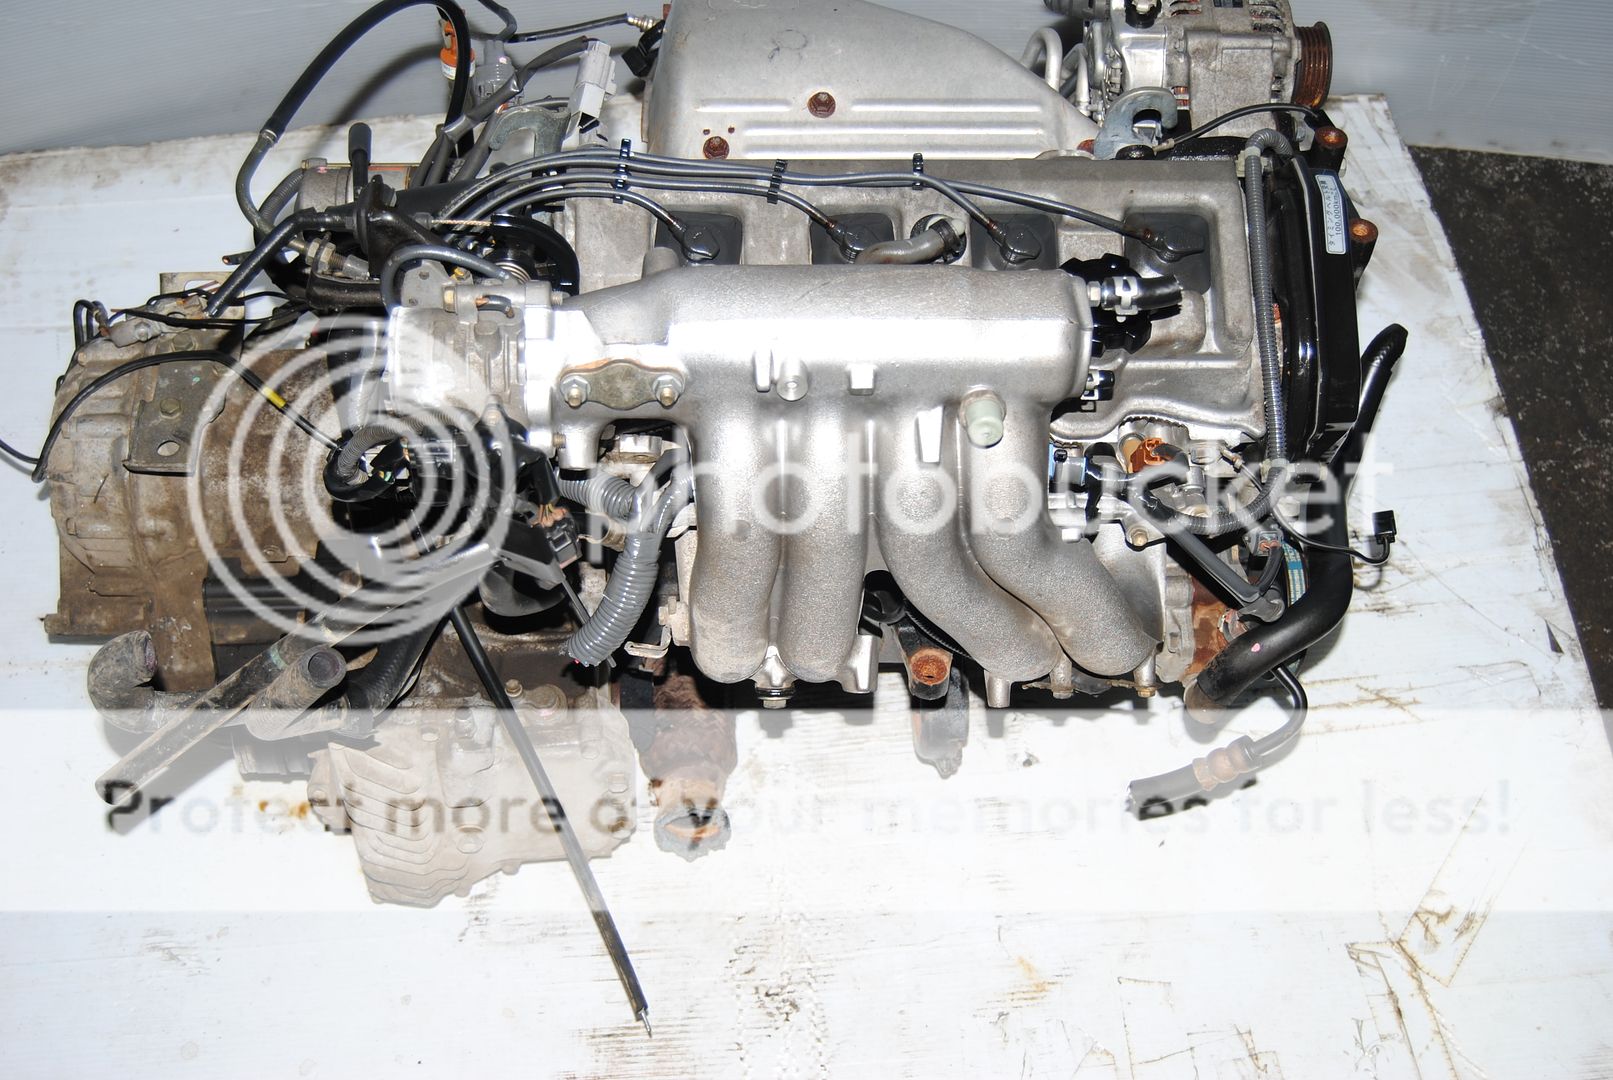 JDM Toyota Camry 5S FE Engine 97 01 Camry 4CYL 2 2L at Transmission